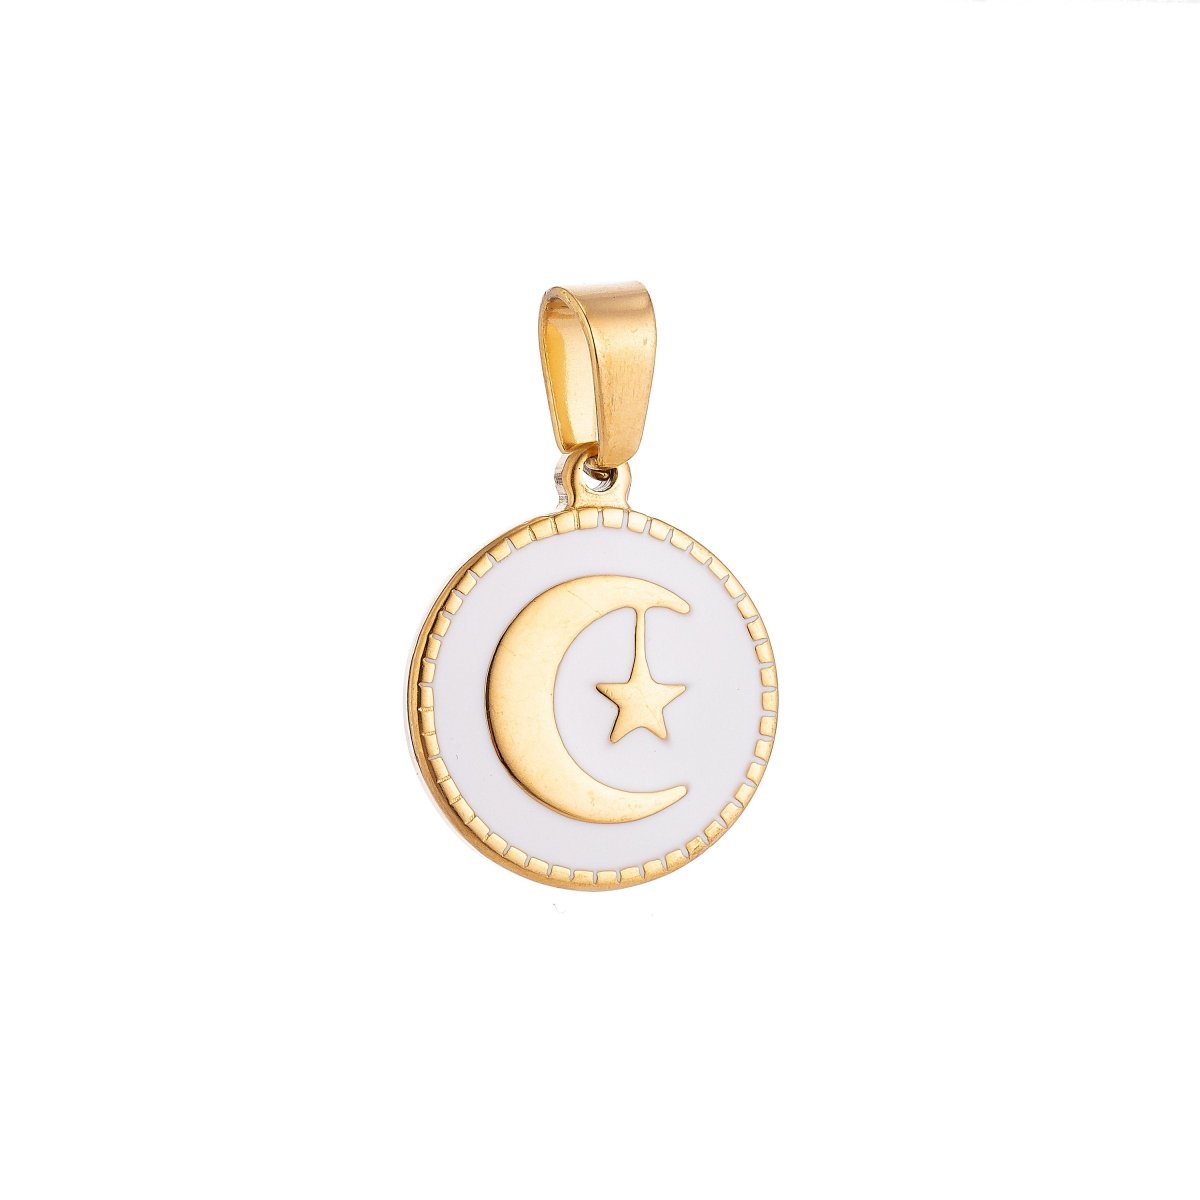 Gold Filled Crescent Sailor Moon and Star in Circle Medallion Necklace Pendant Bracelet Beads Earring Charm Bails for Jewelry Making J-373 - DLUXCA